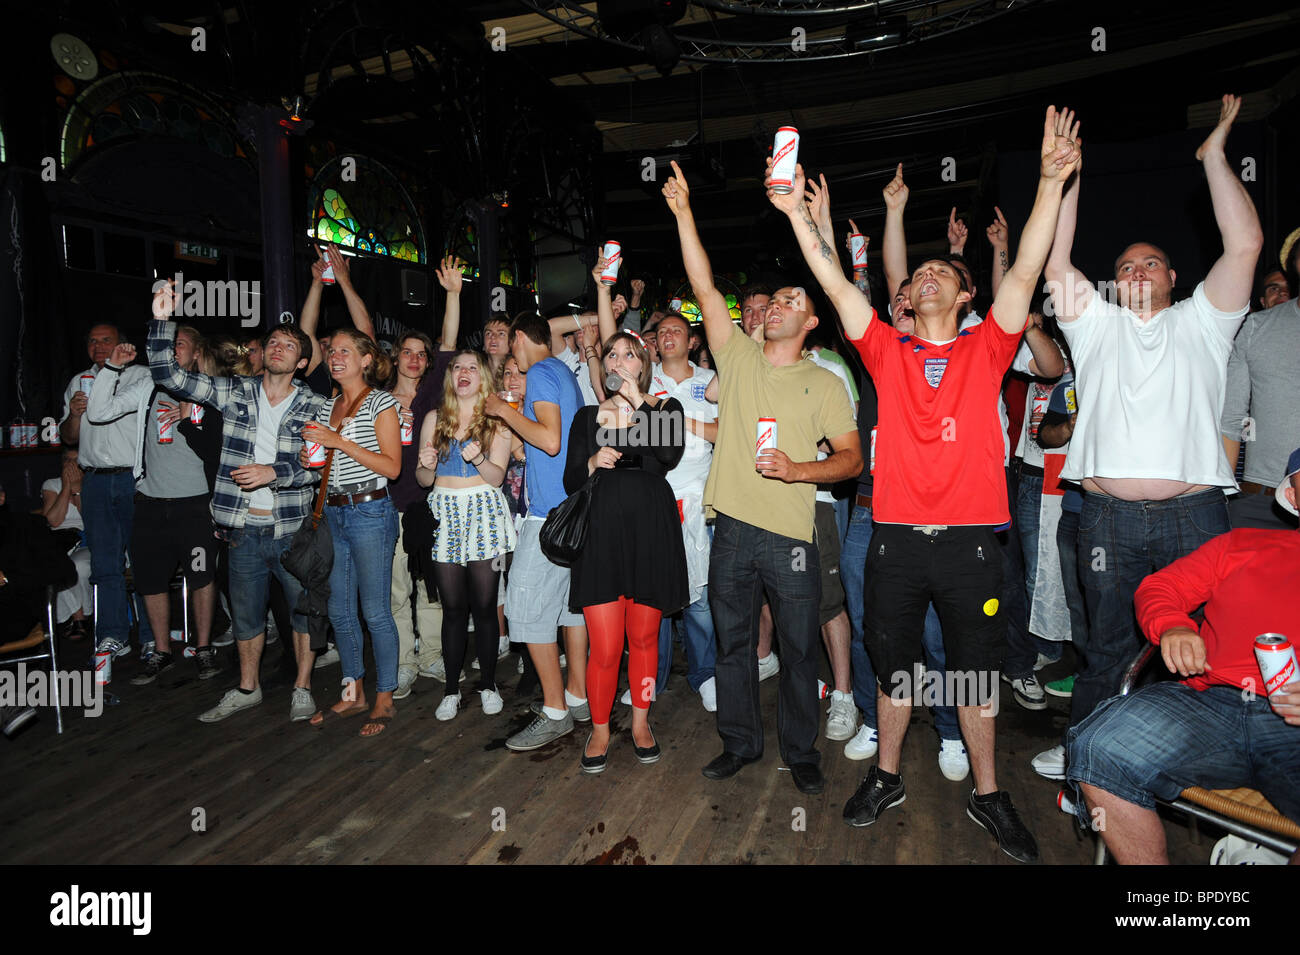 England football fans getting ready to cheer on the team during the 2010 world cap at the Concorde 2 a bar with a large screen Stock Photo